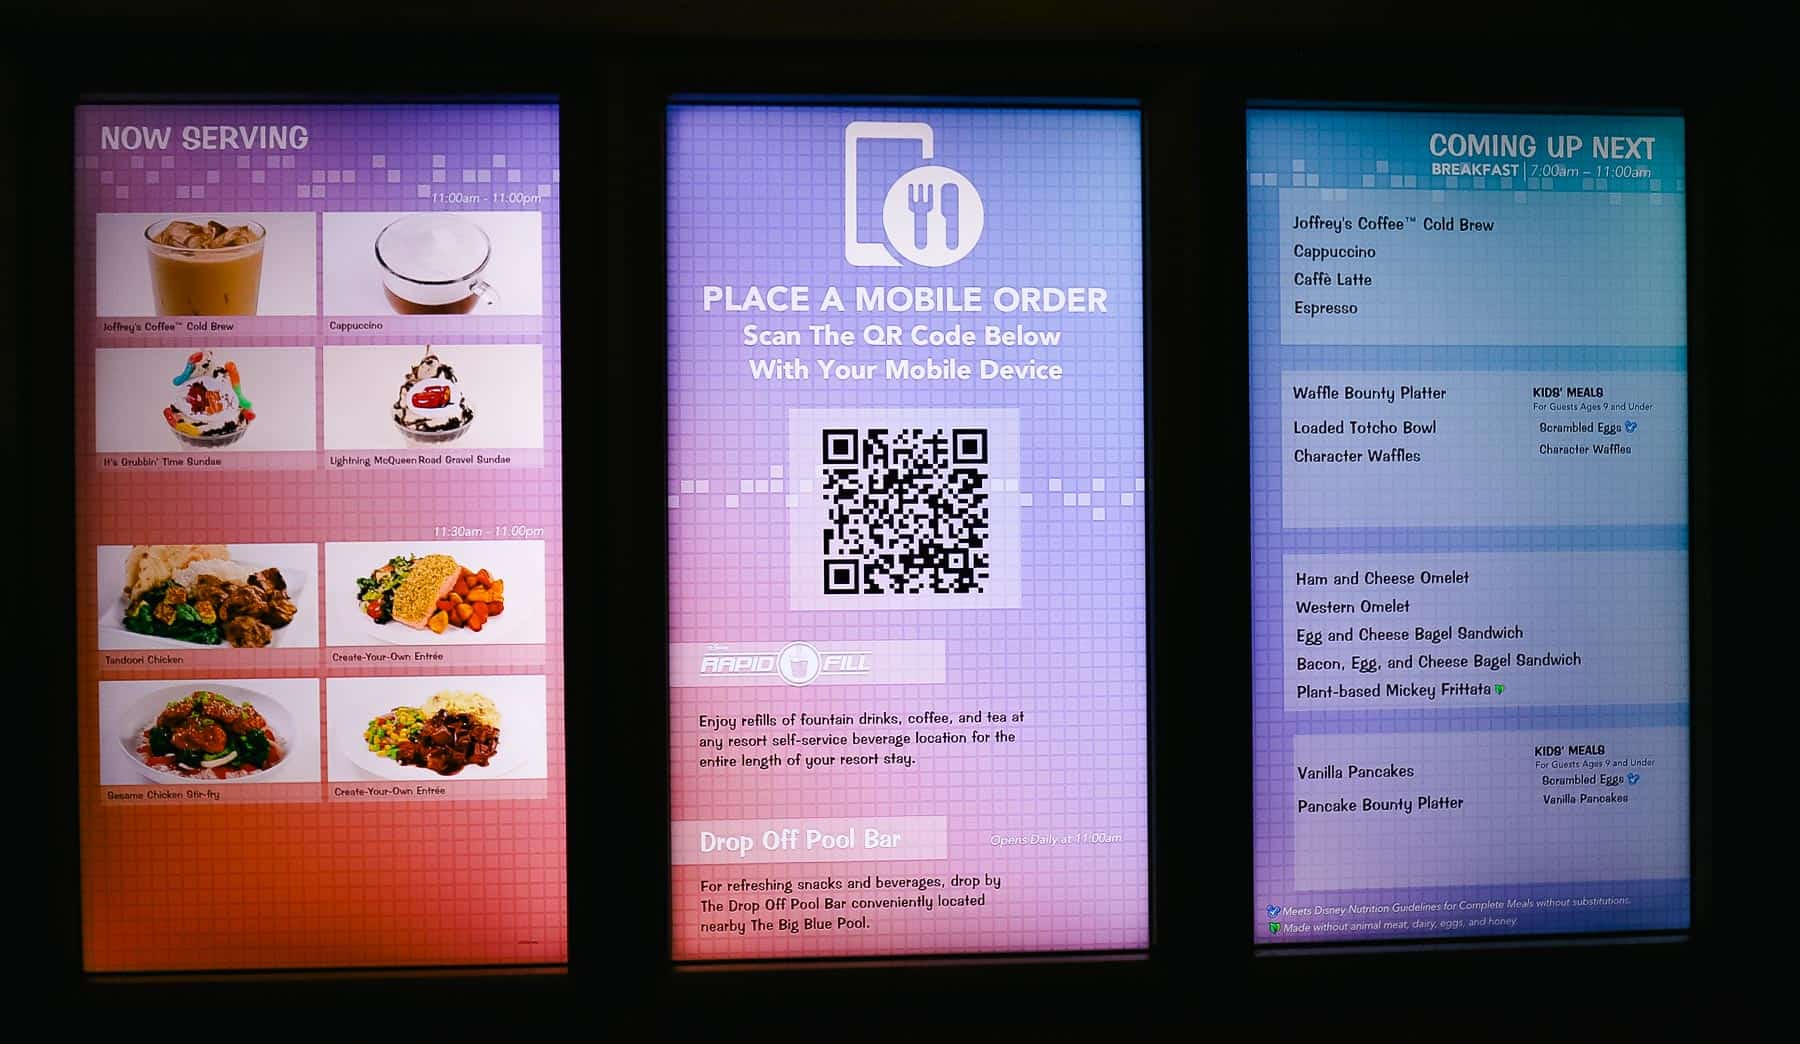 a menu board that changes showing the various options available and a section on how to place a mobile order